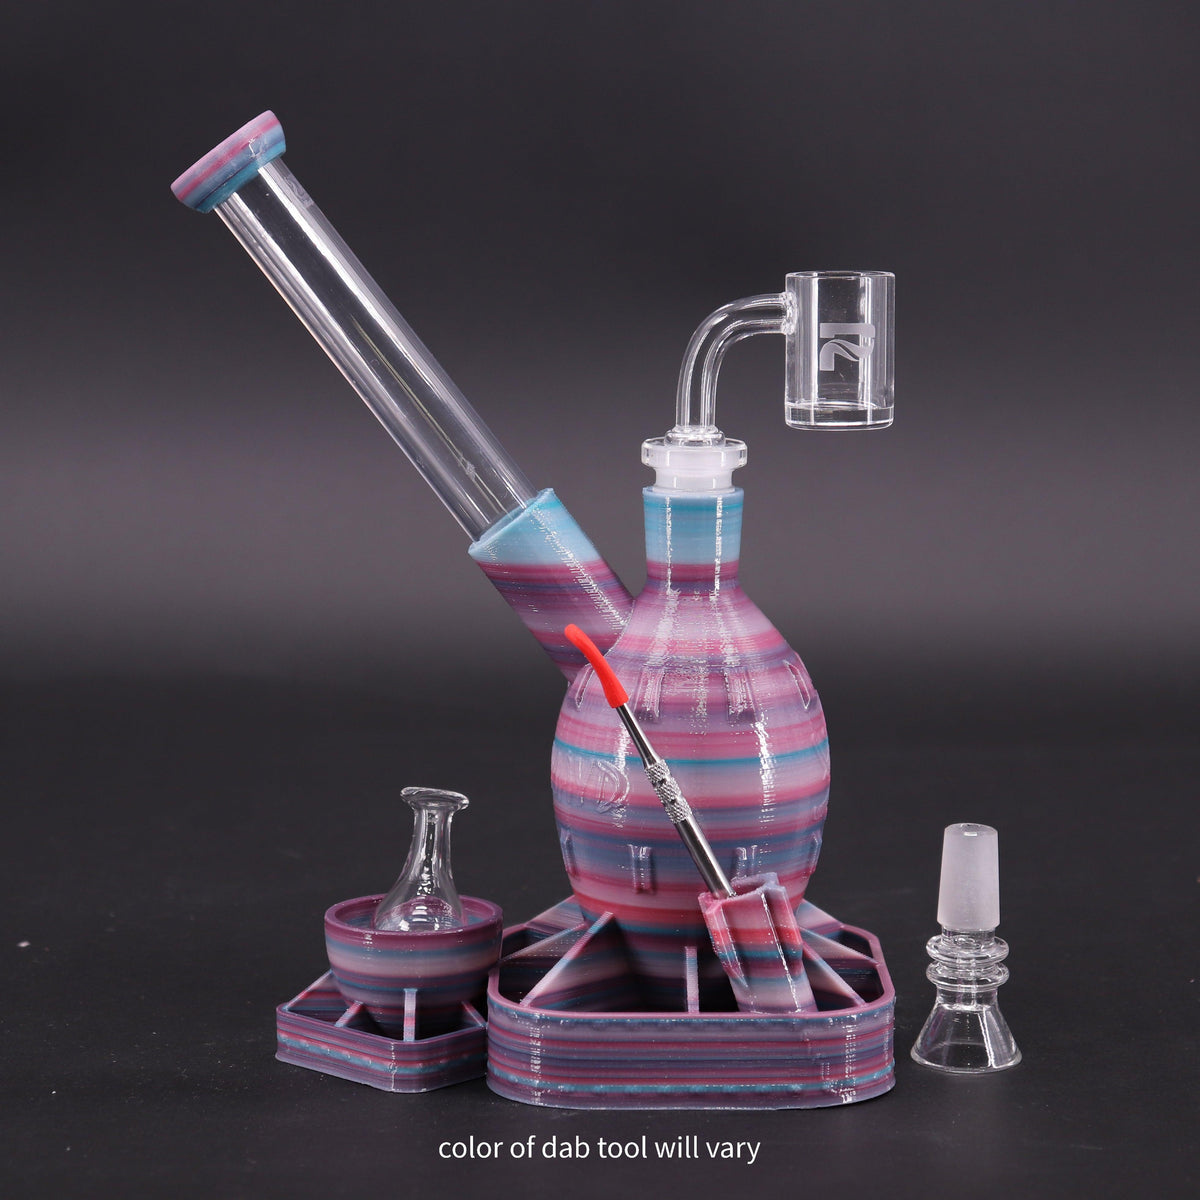 A-Bomb shatterproof dab rig with quality quartz banger nail pictured in purple and blue